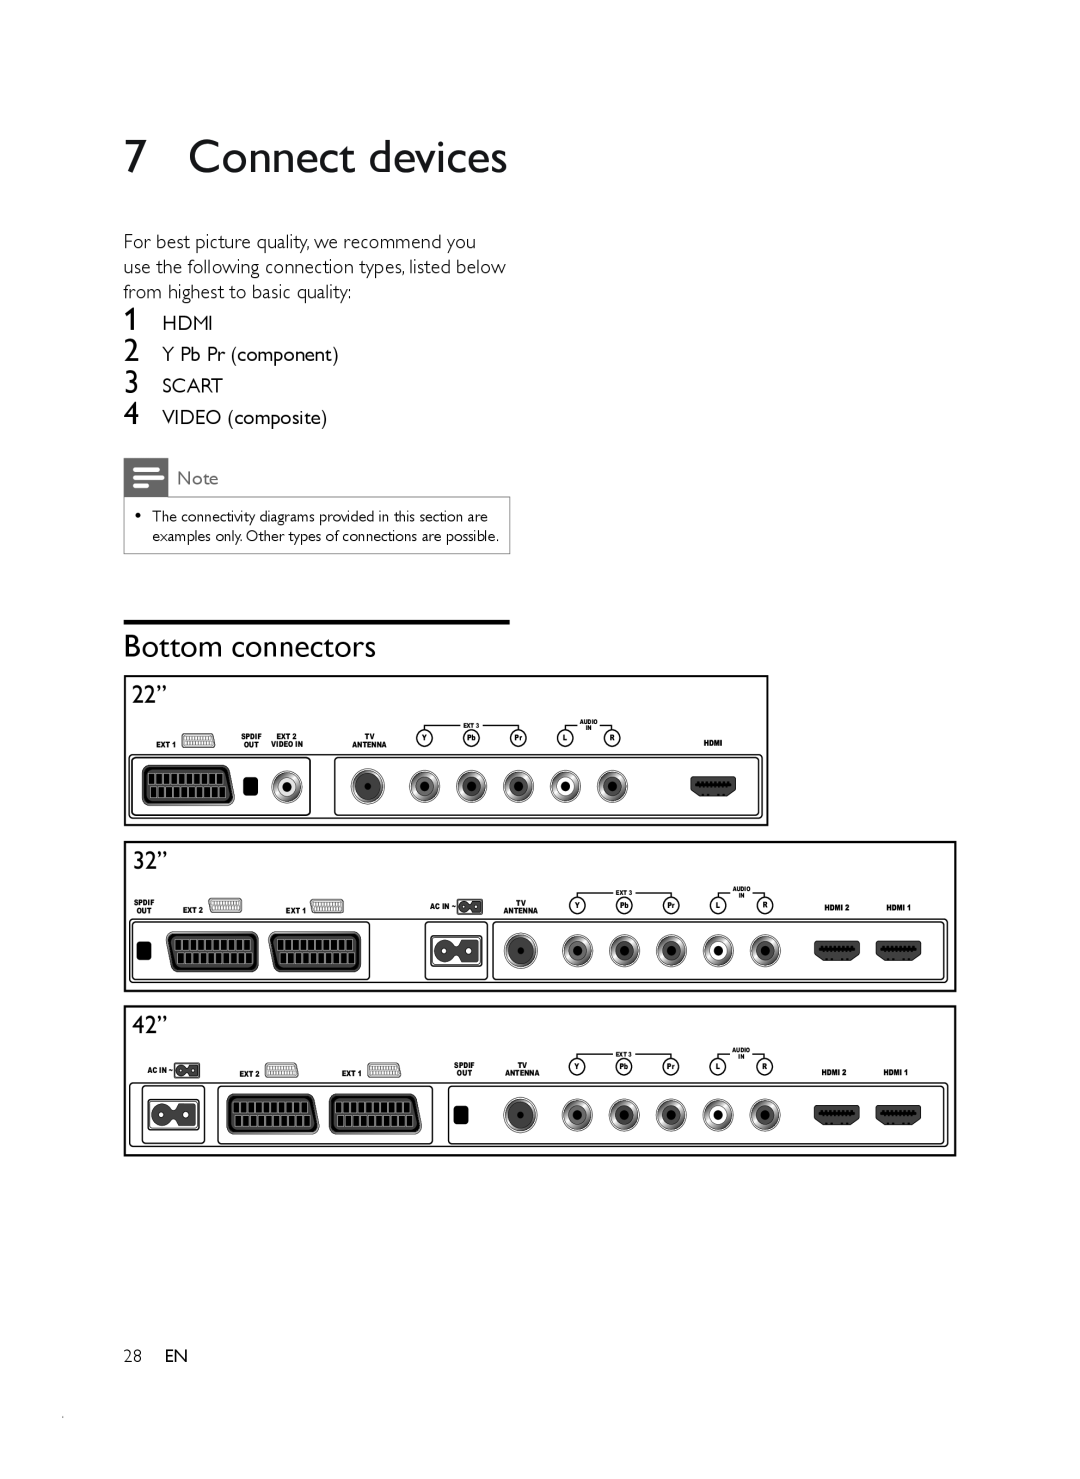 Philips 22PFL6403D/12, 32PFL6403D/12 user manual Connect devices, Bottom connectors, Spdif, Ac In ~ 